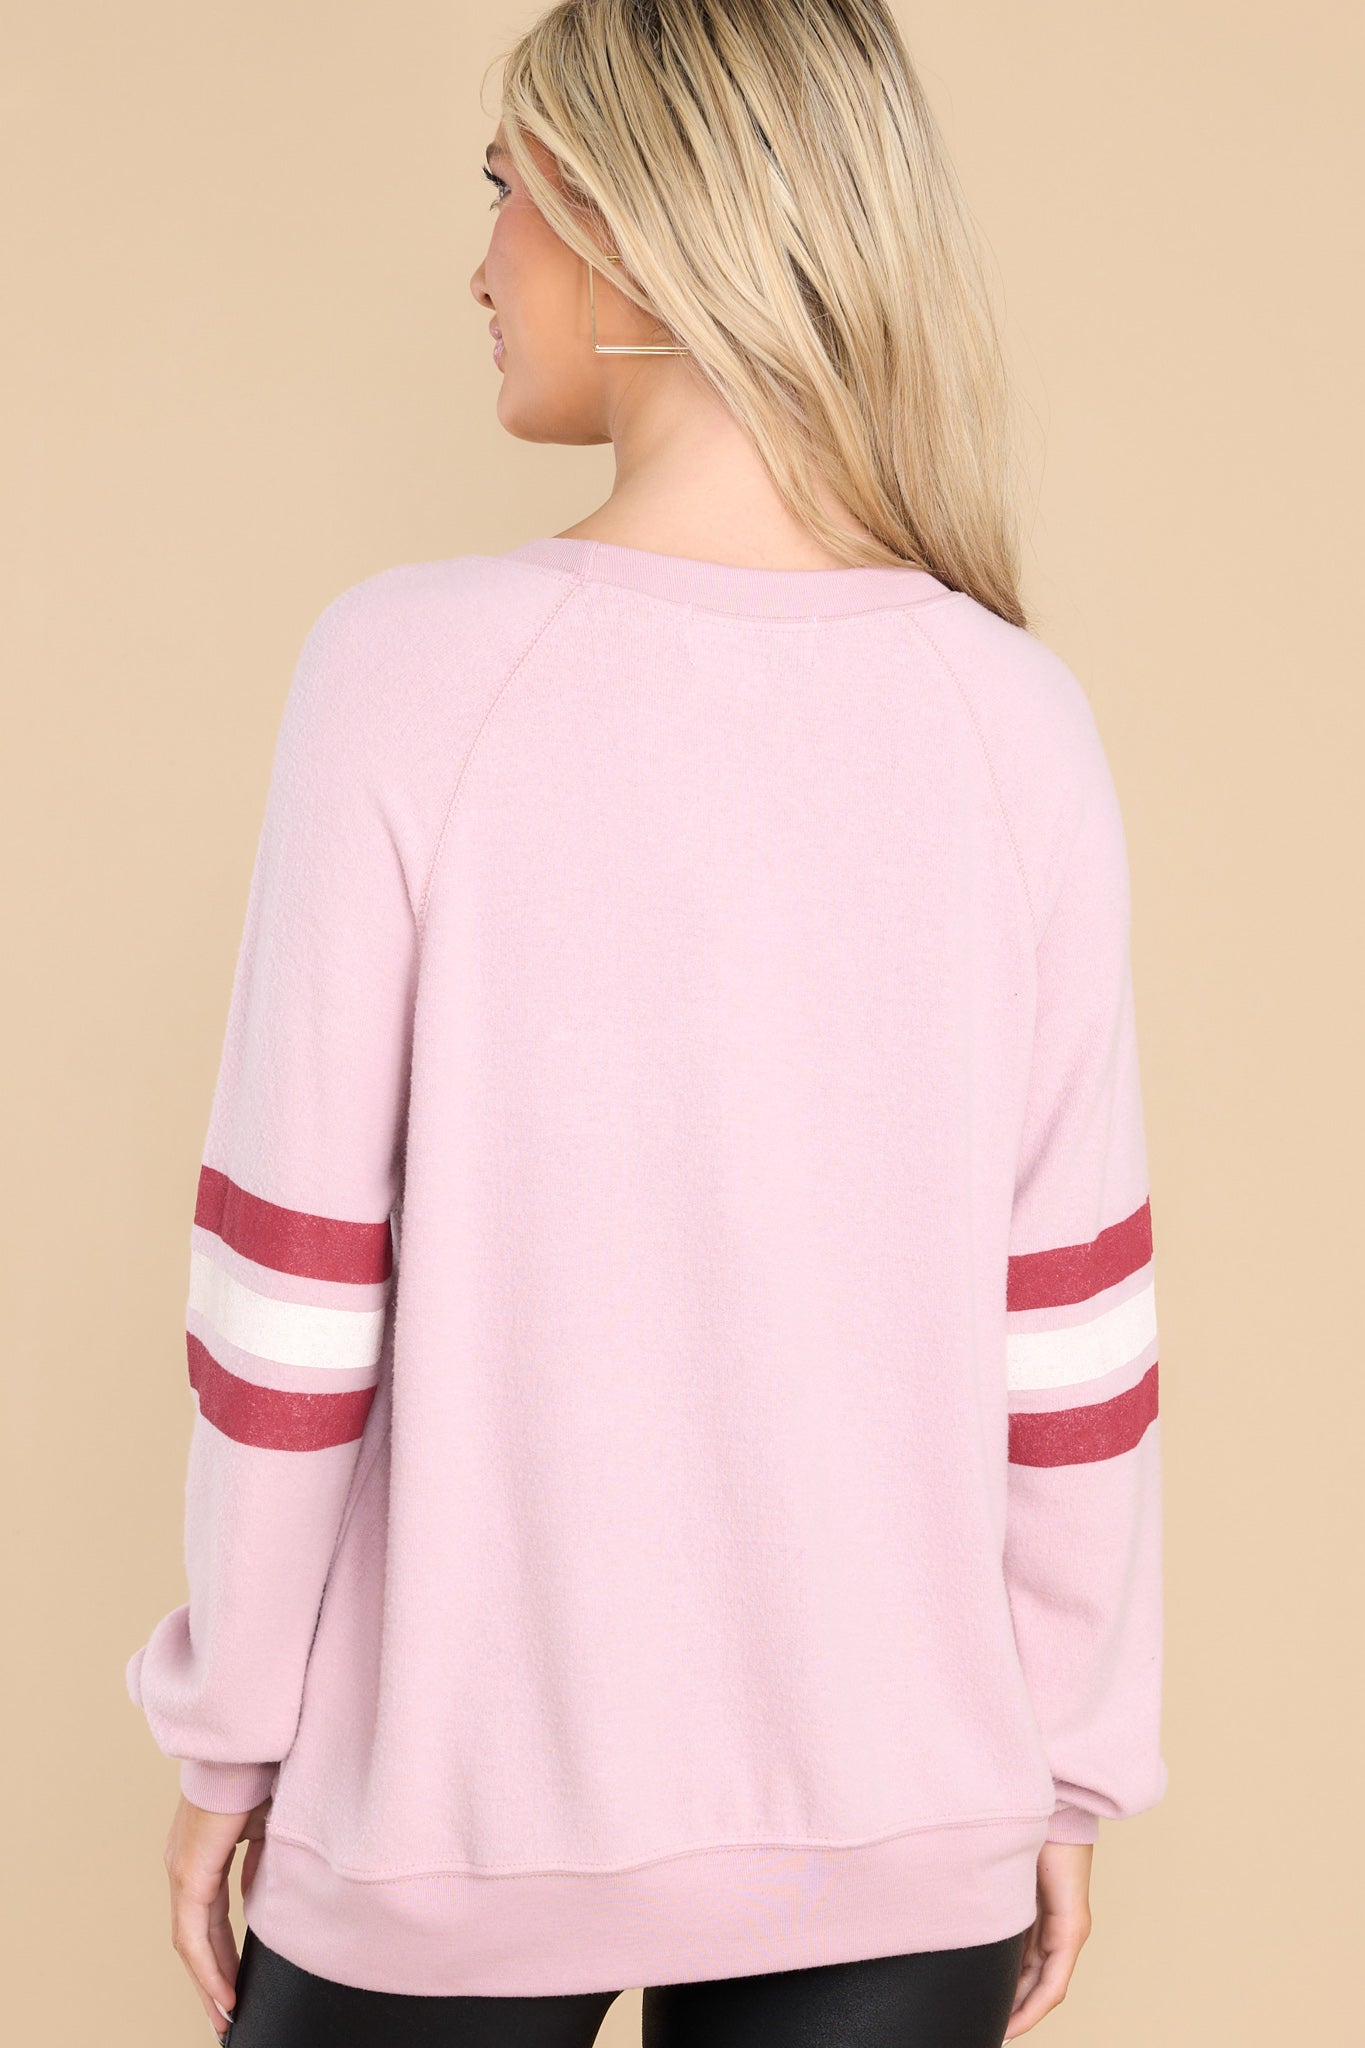 9 You Were Naughty Burnished Lilac Sommers Sweatshirt at reddress.com